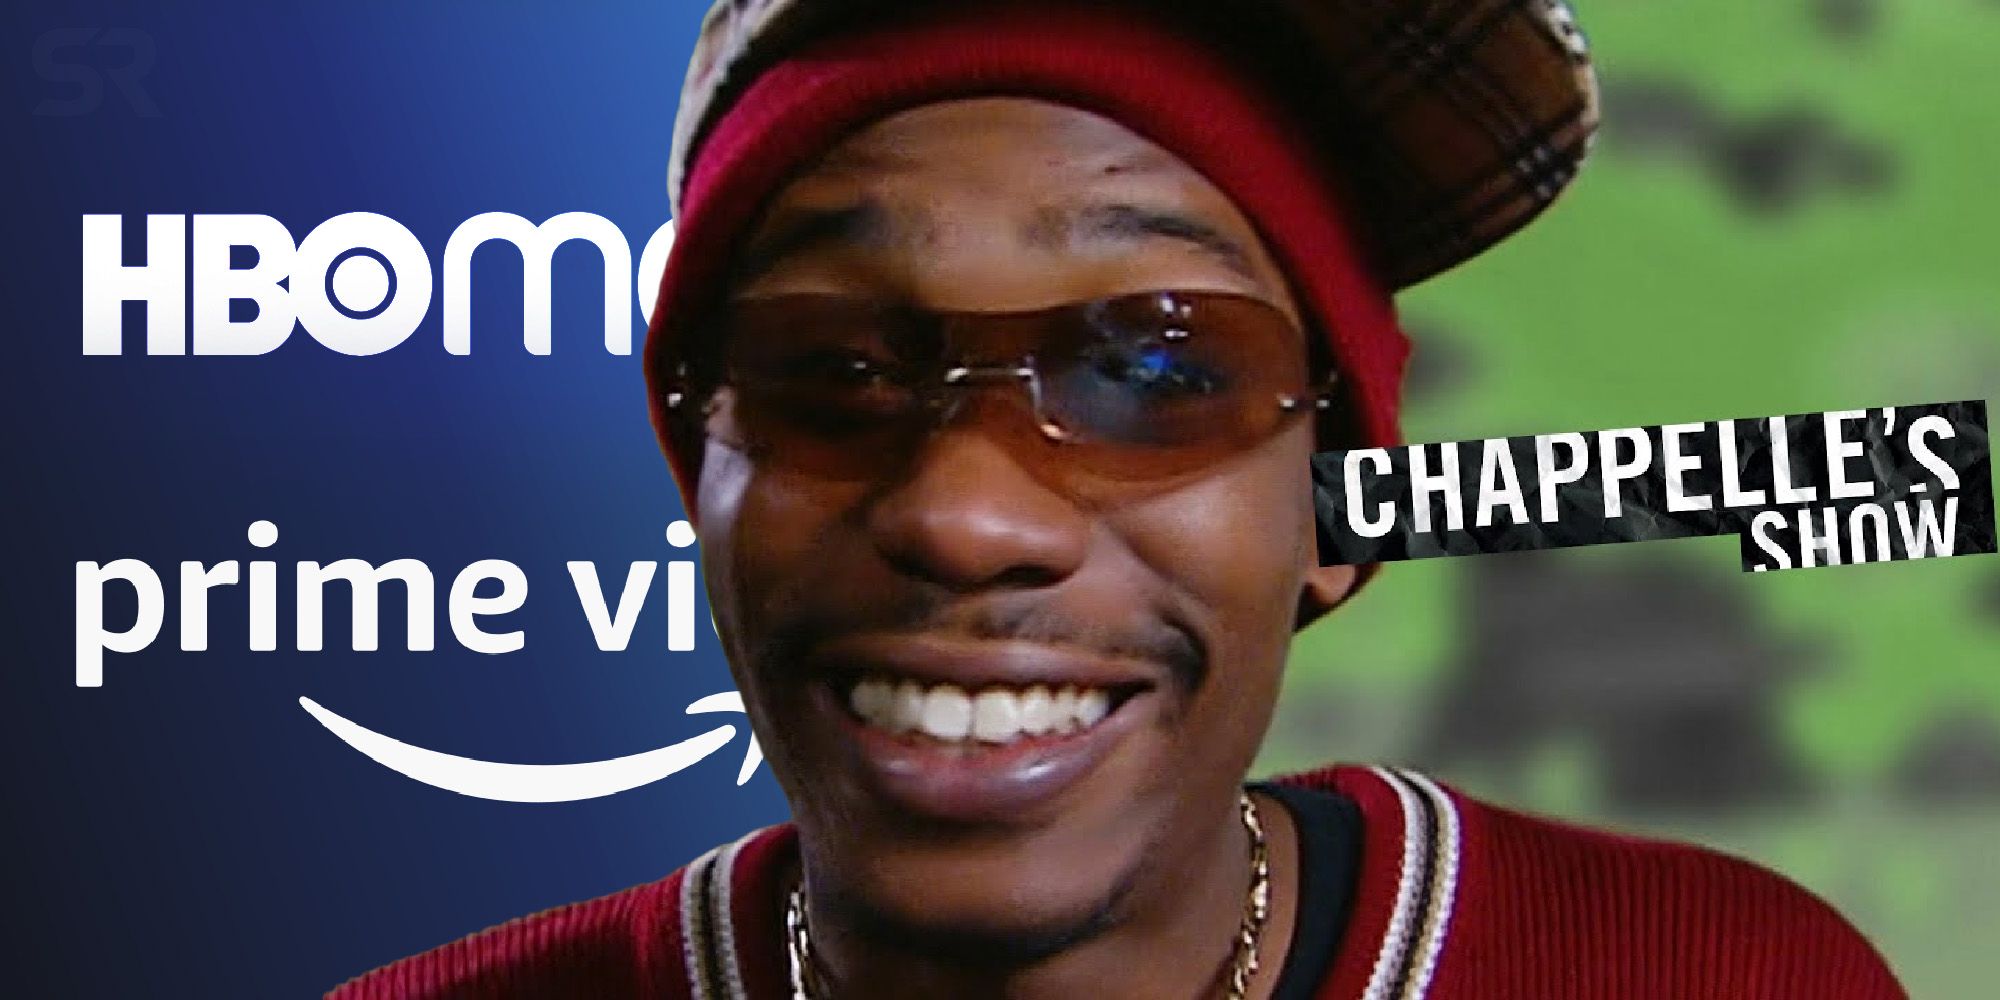 Chappells show Amazon prime video hbo max